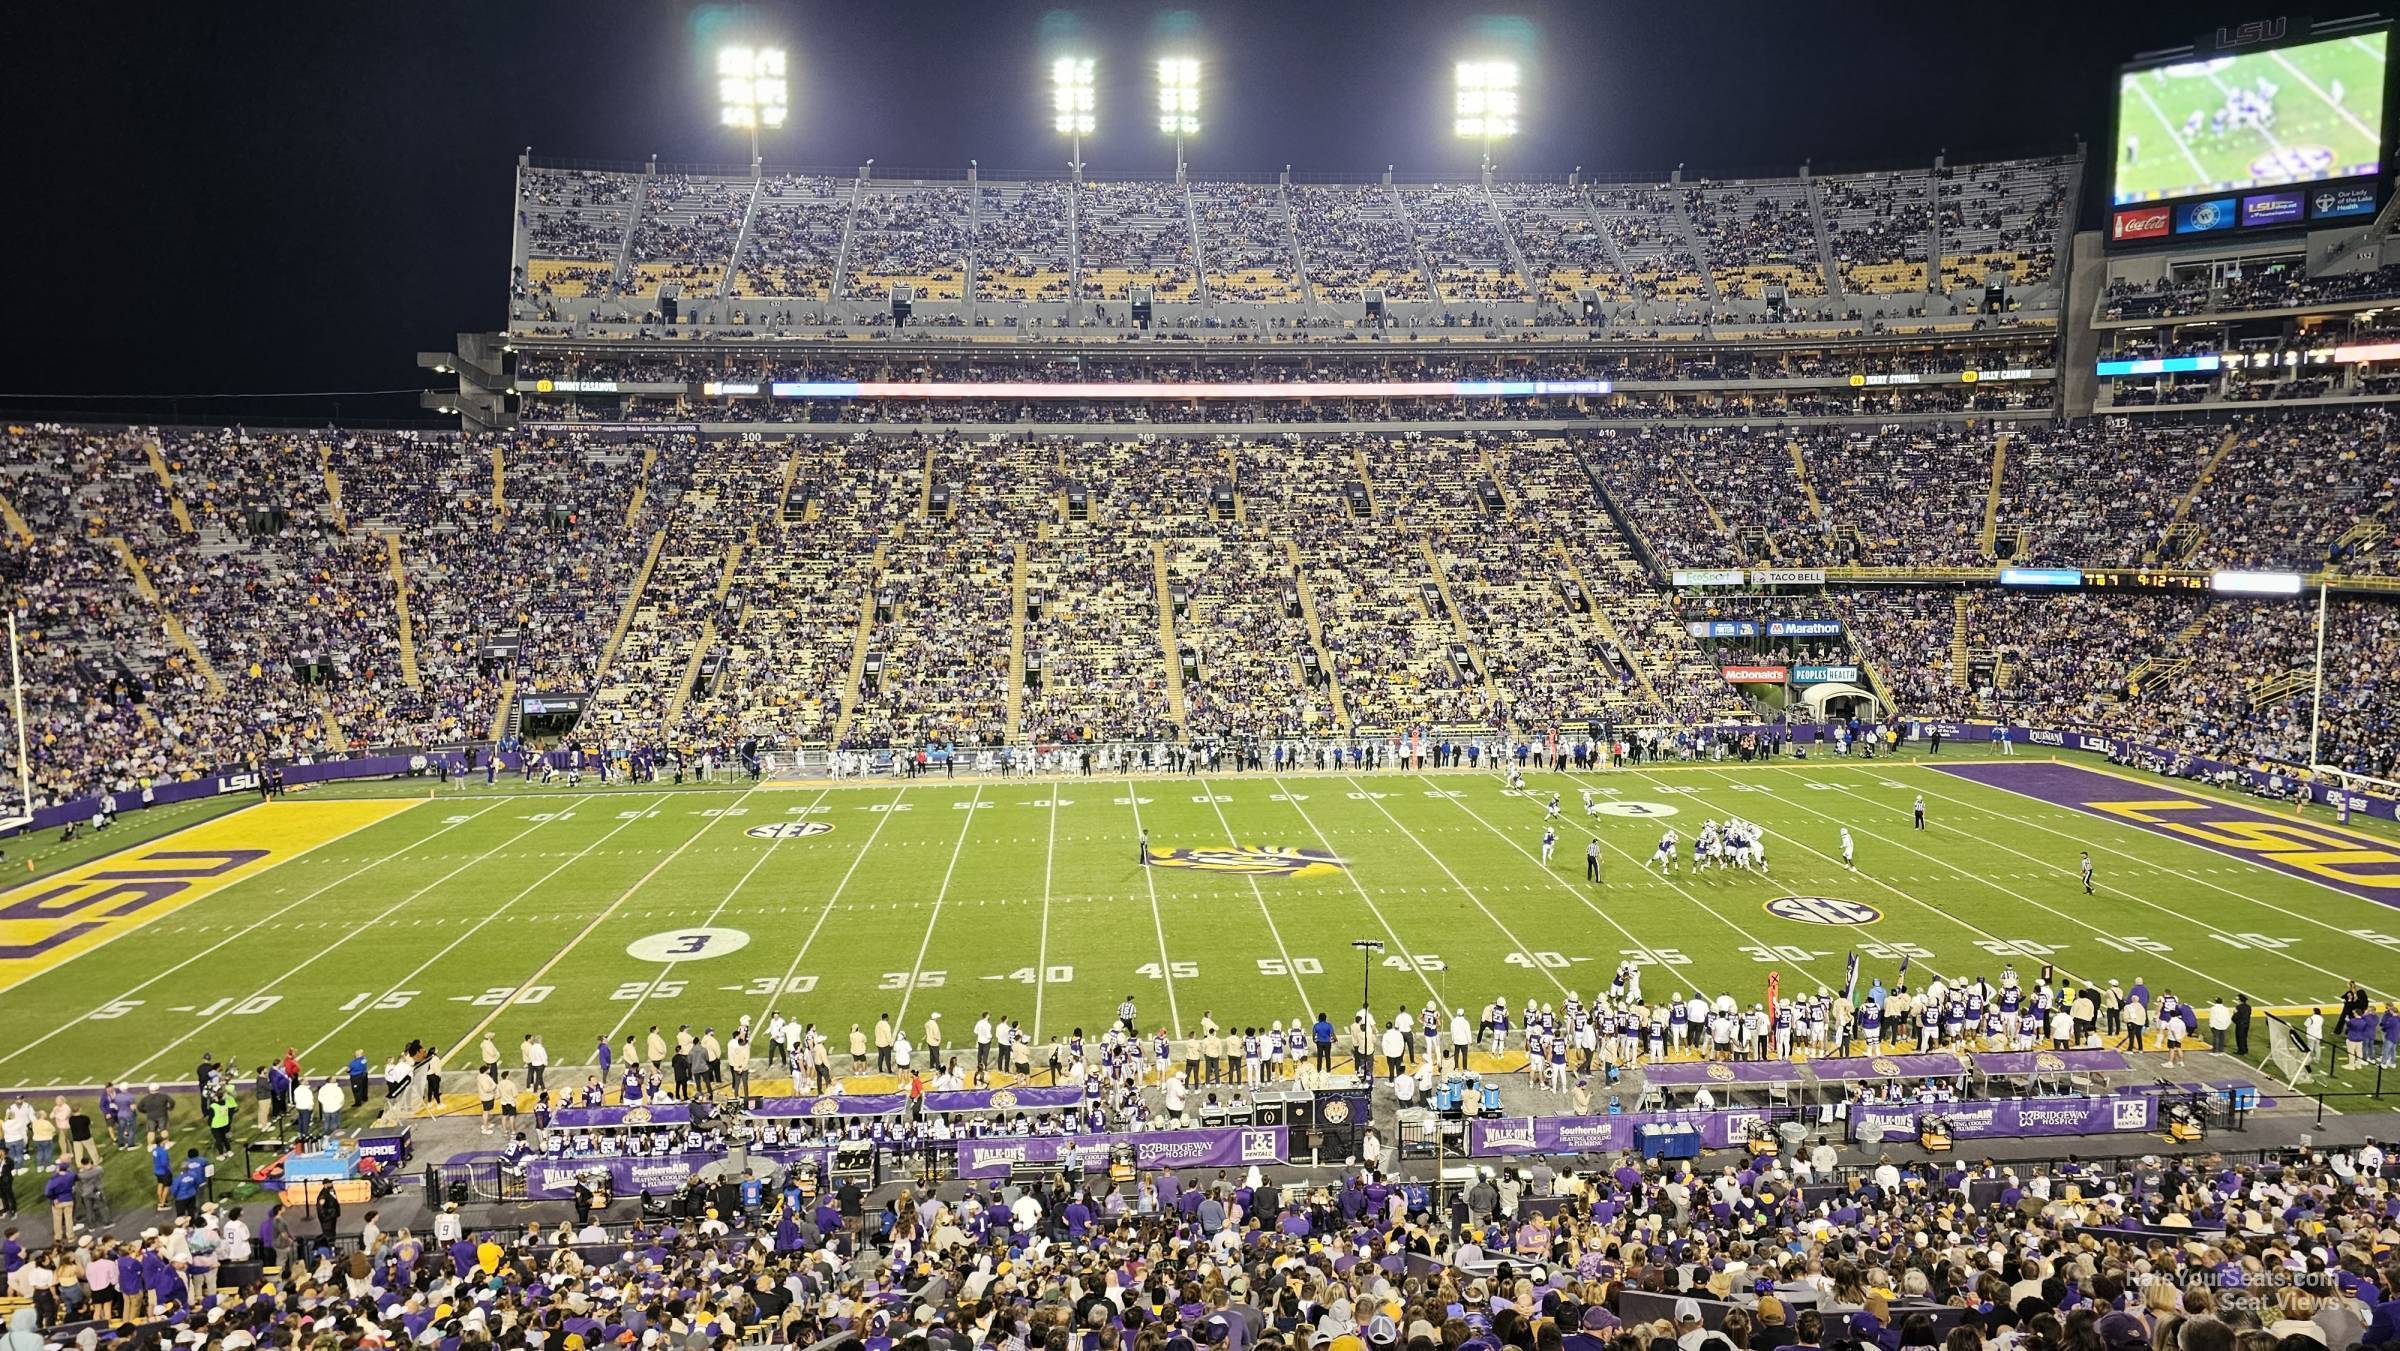 section 104, row 48 seat view  - tiger stadium